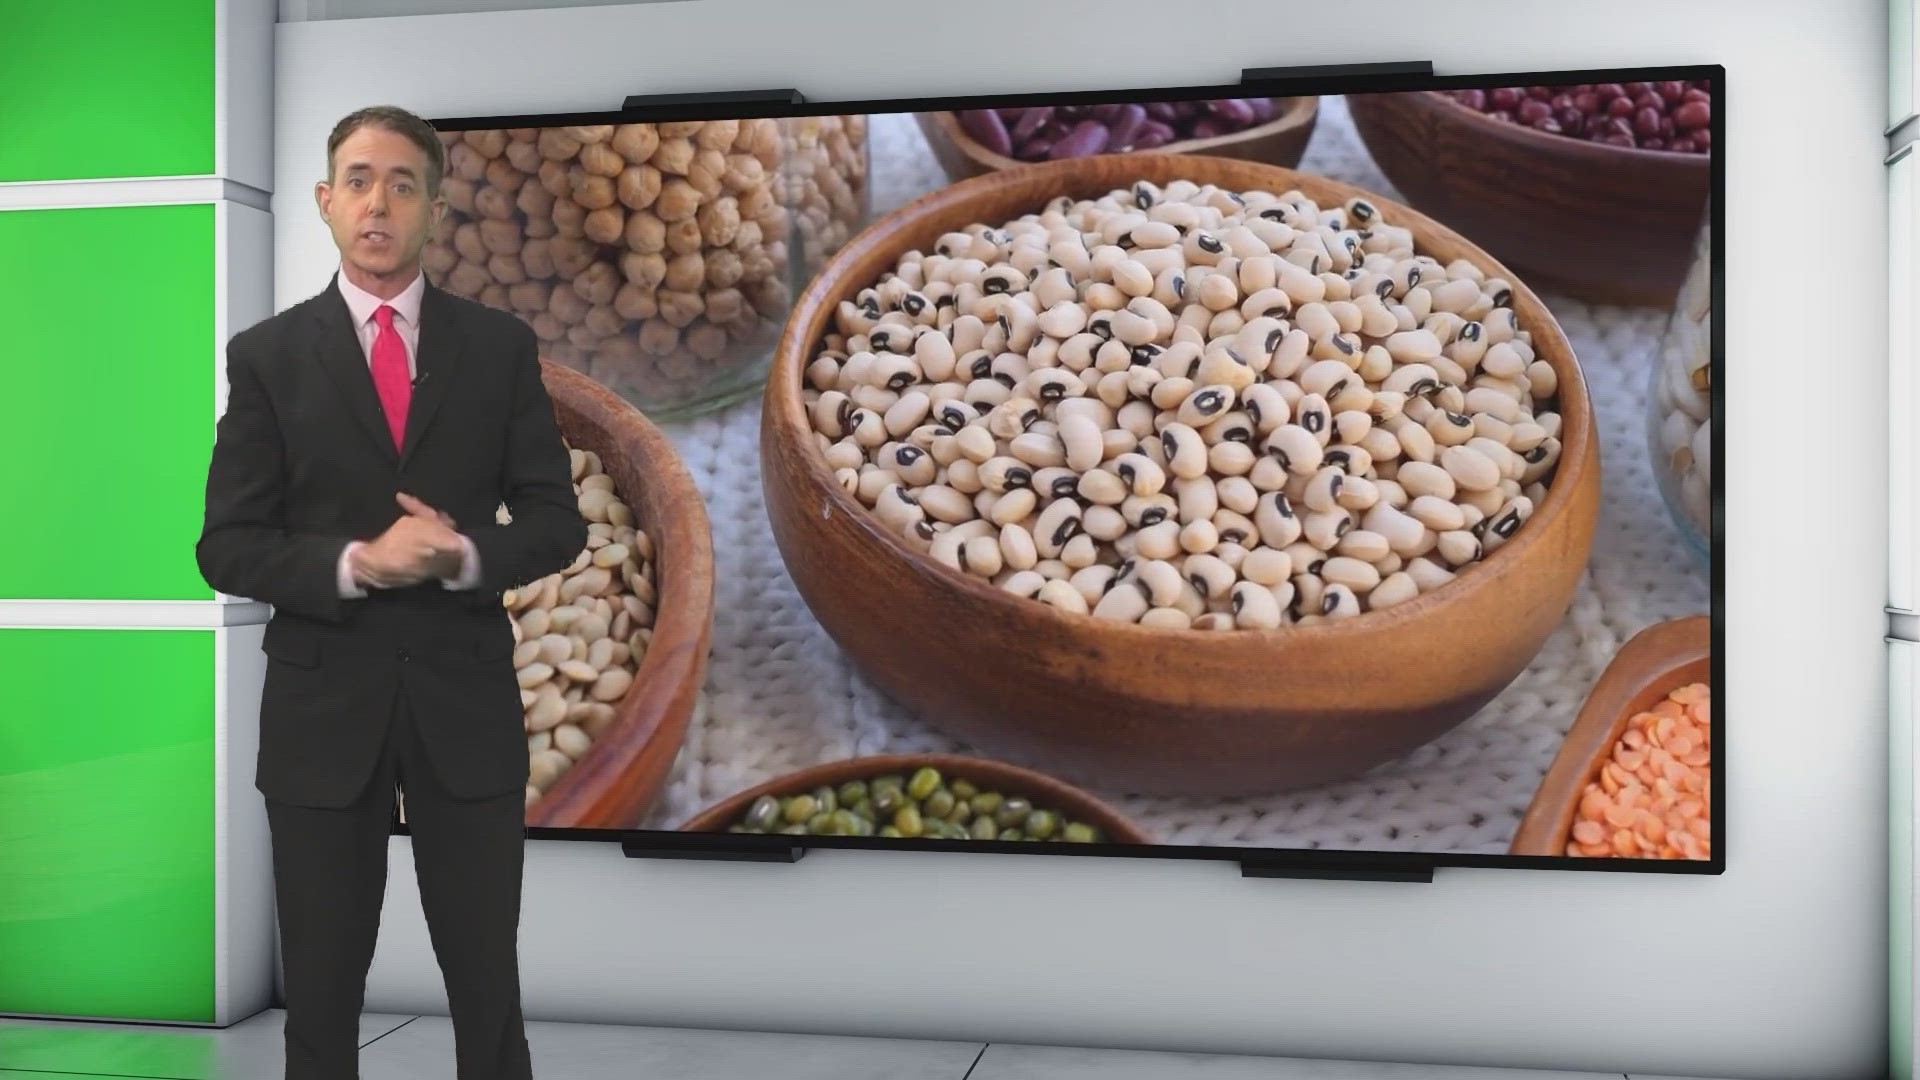 A new viral claim is touting the apparent superfood qualities of beans. Are they accurate?